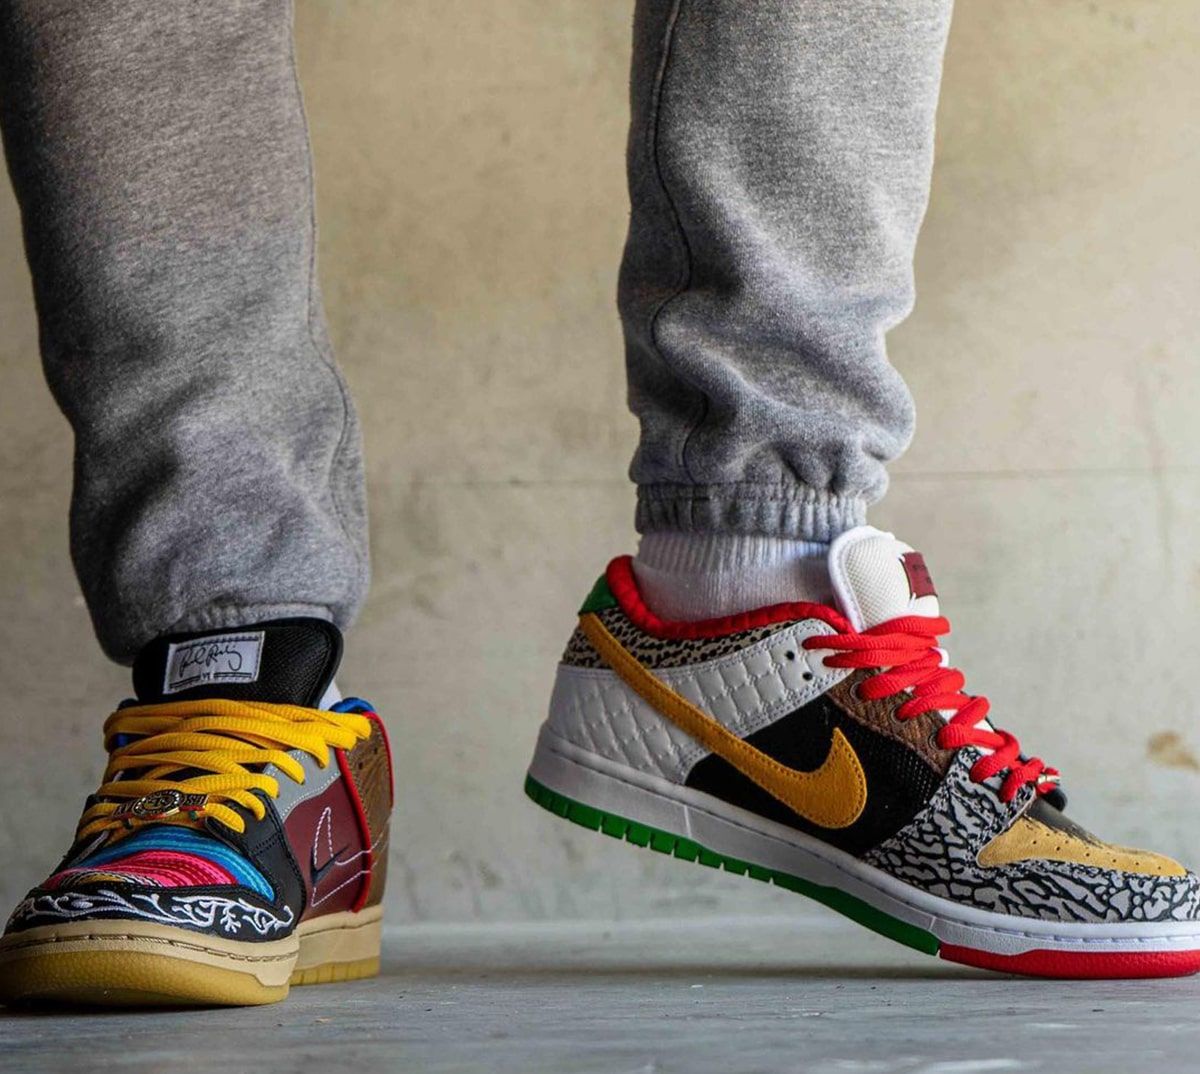 Nike SB Dunk Low “What The P-Rod” Arrives May 24th | House of Heat°